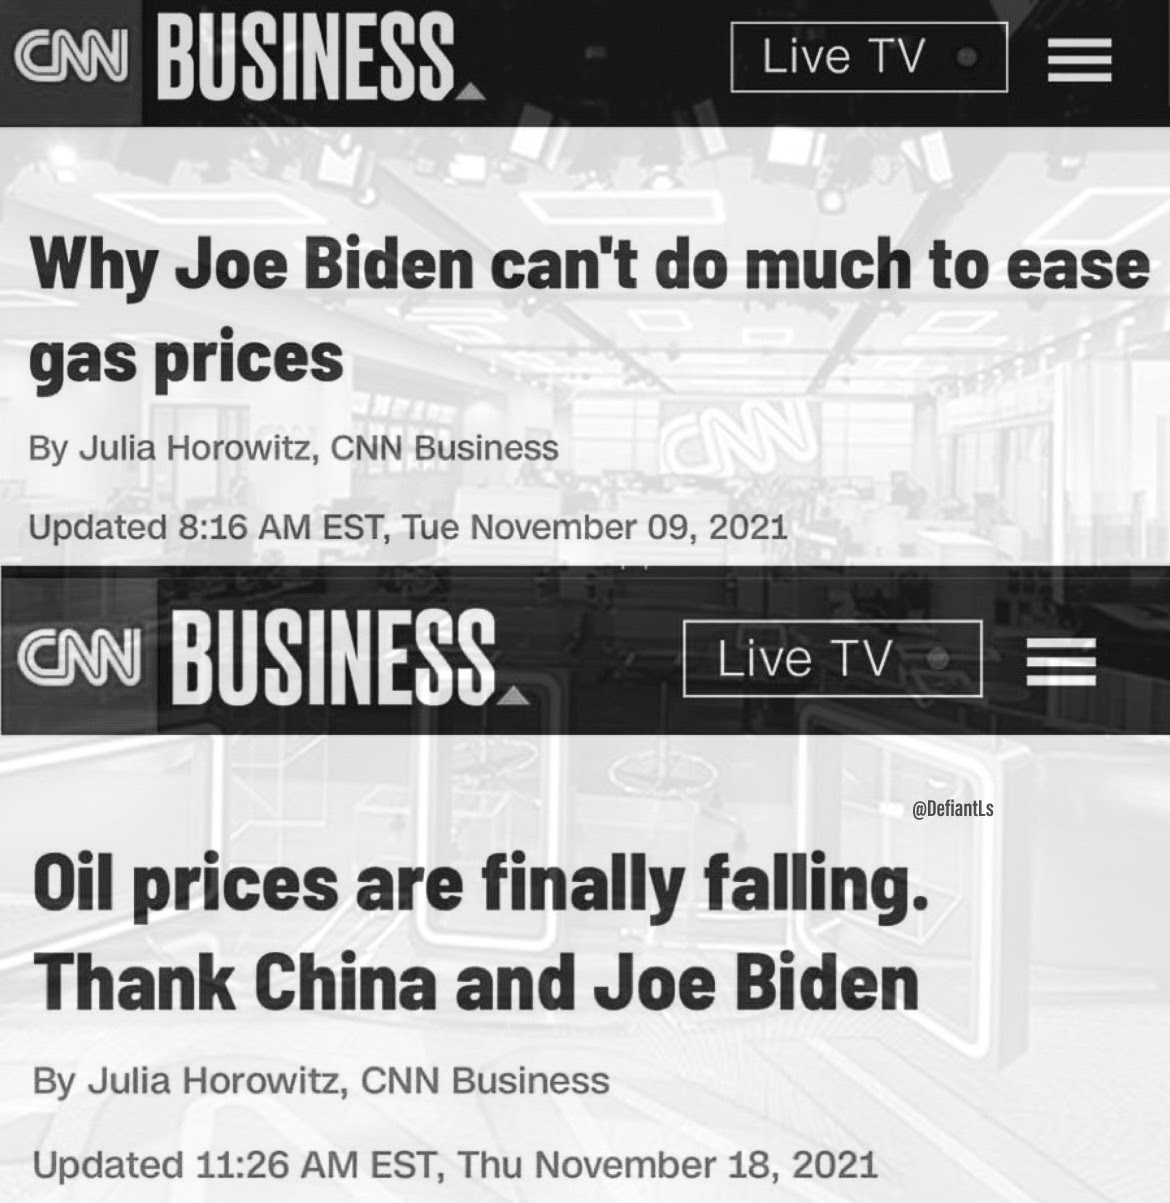 Hypocrite Julia Horowitz. She first says Joe Biden has nothing to do with rising gas prices, the thanks him when prices go down.